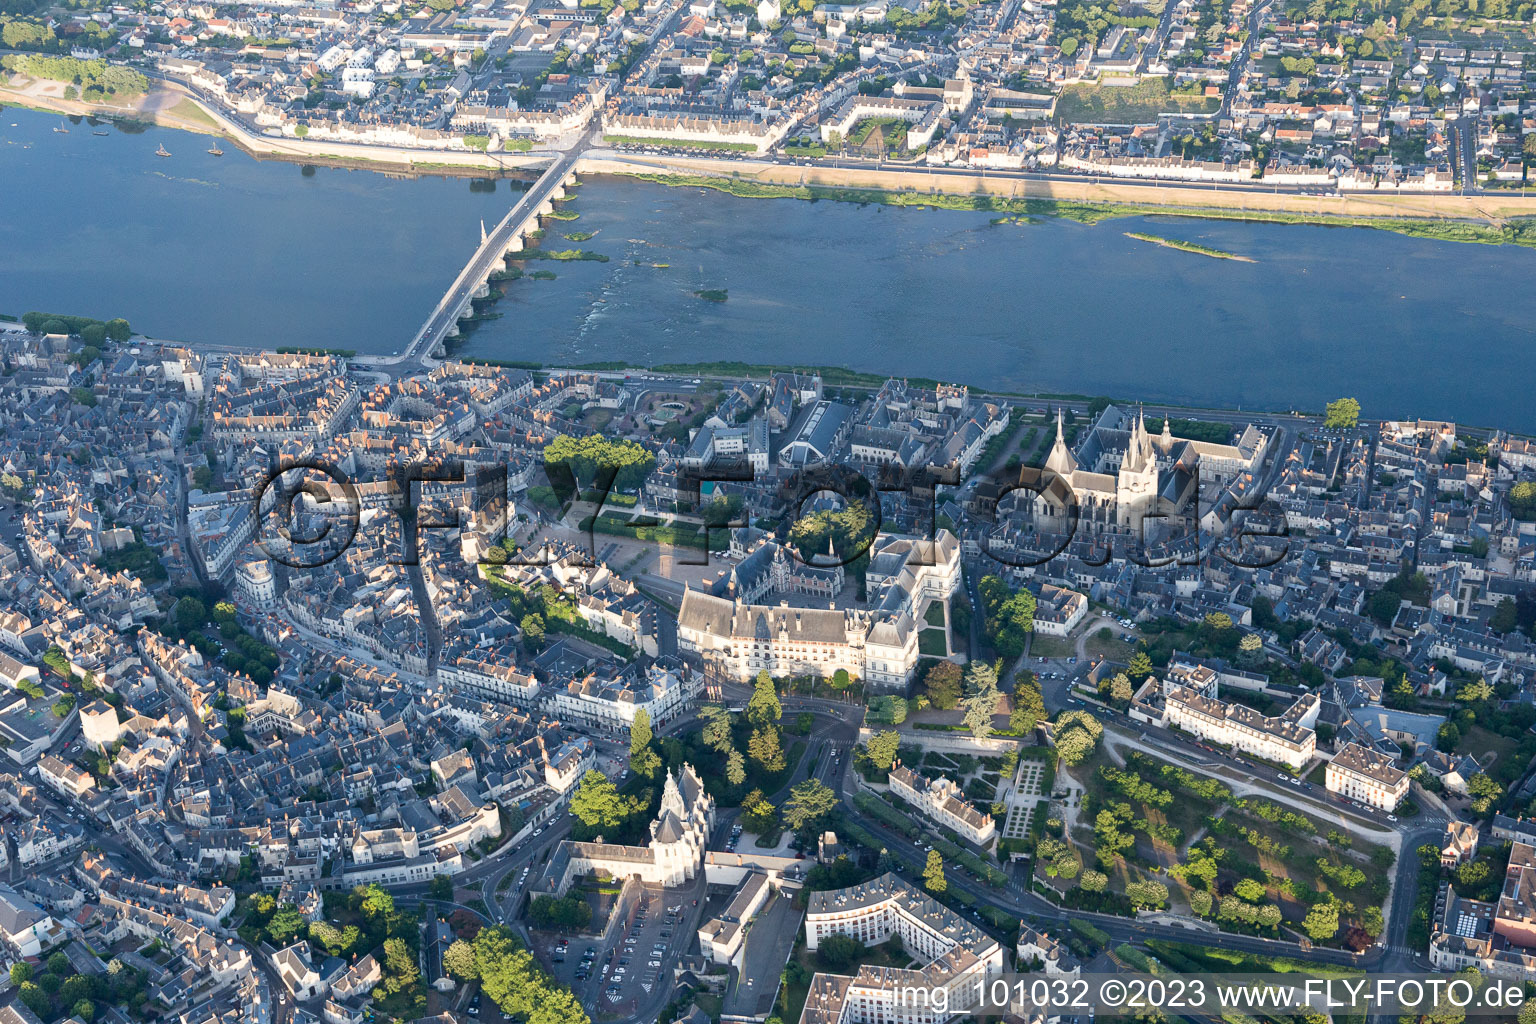 Blois in the state Loir et Cher, France from above